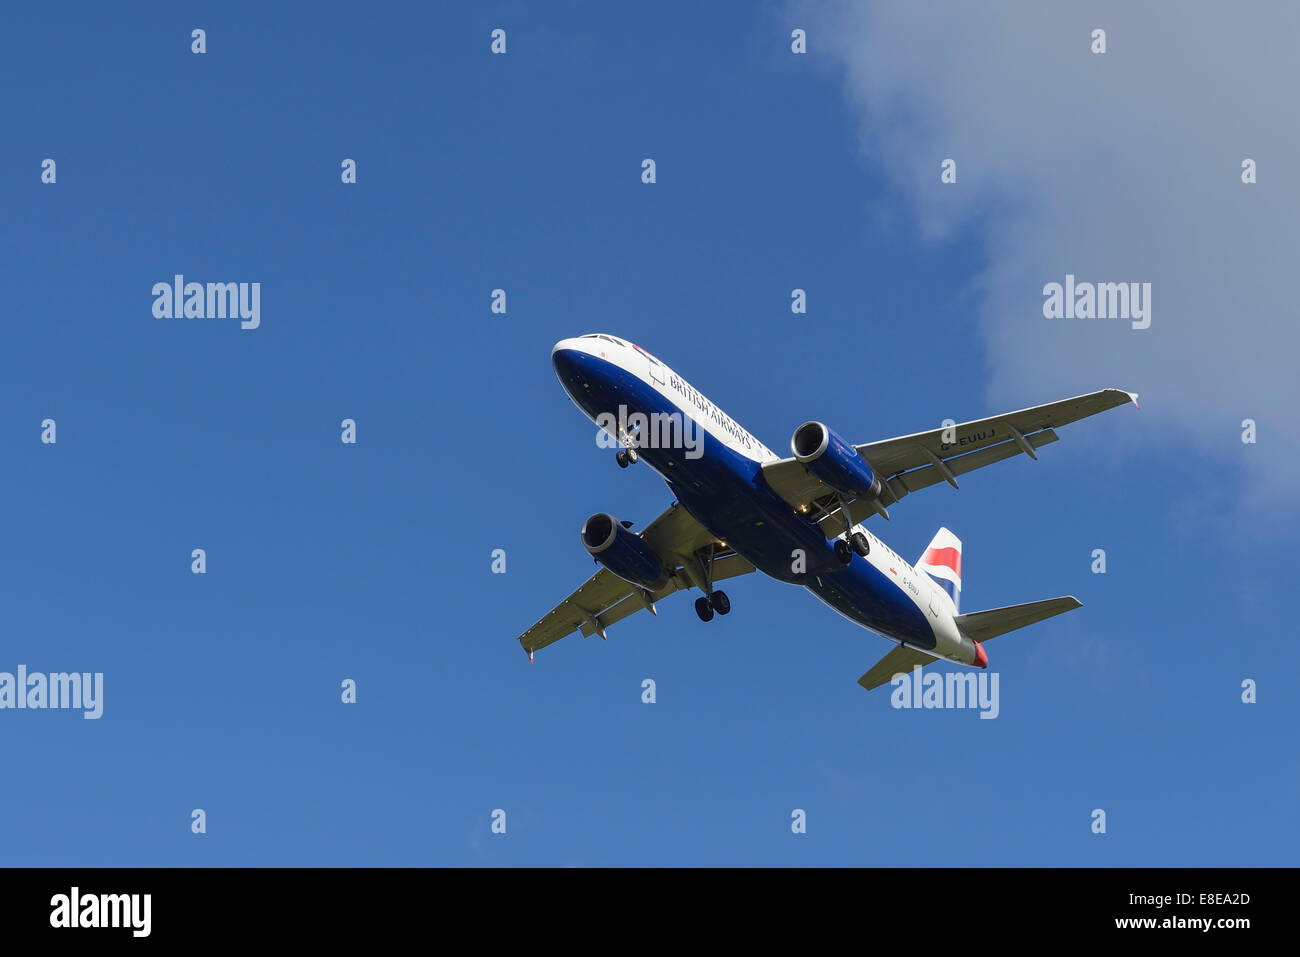 British Airways Airbus A320 aircraft on the final approach to Manchester Airport UK Stock Photo